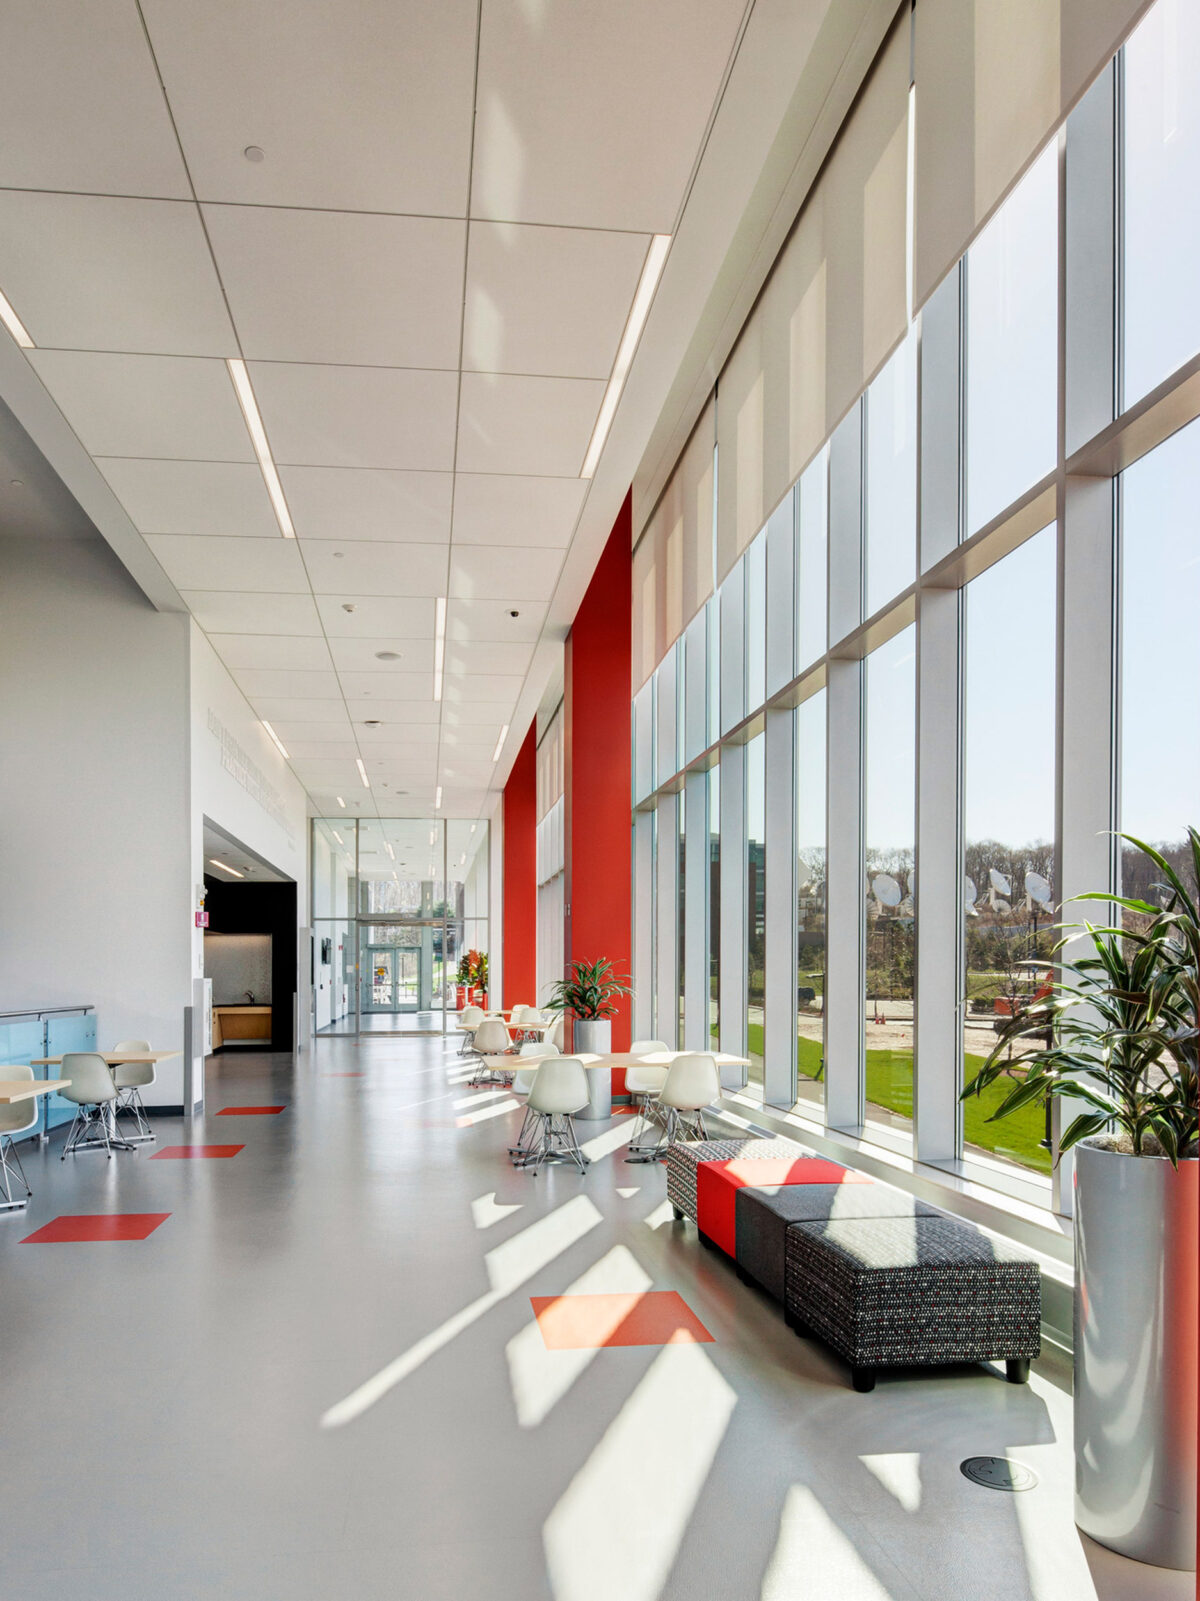 Bright, modern office lounge with floor-to-ceiling windows, offering ample natural light. White designer chairs and black ottoman complement the minimalist aesthetic. Red accent wall adds a pop of color amidst a neutral palette, enhancing the space's contemporary feel.